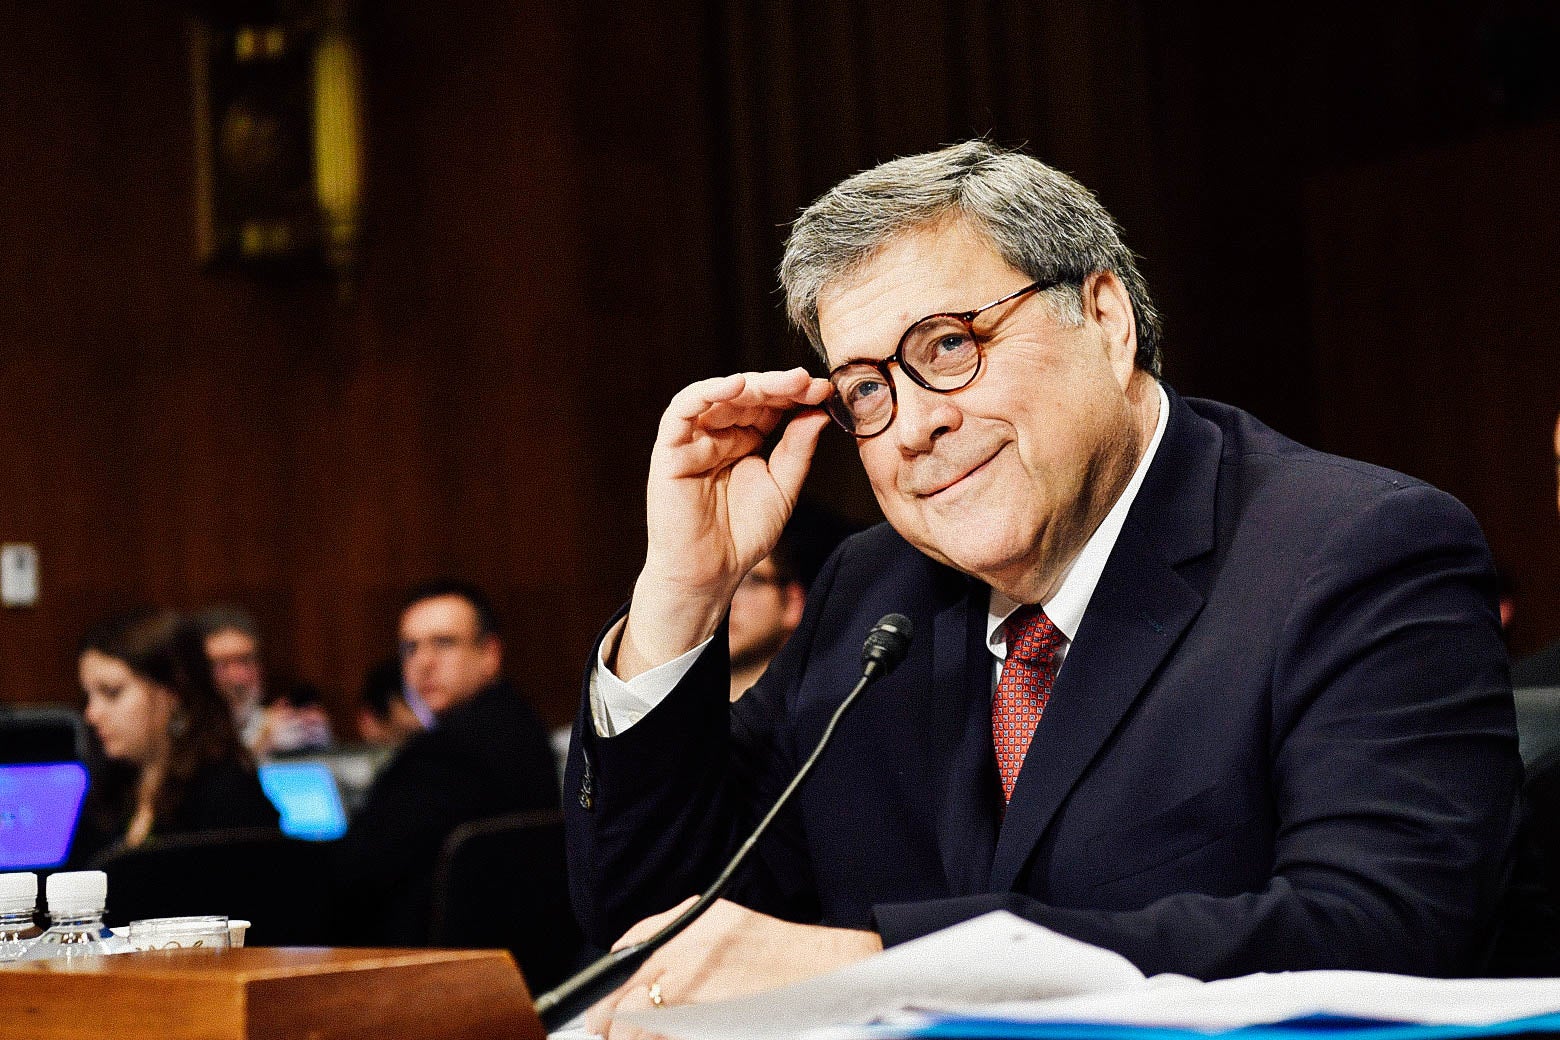 Attorney General William Barr smiles and adjusts his glasses while testifying before the Senate Judiciary Committee on Wednesday in Washington.